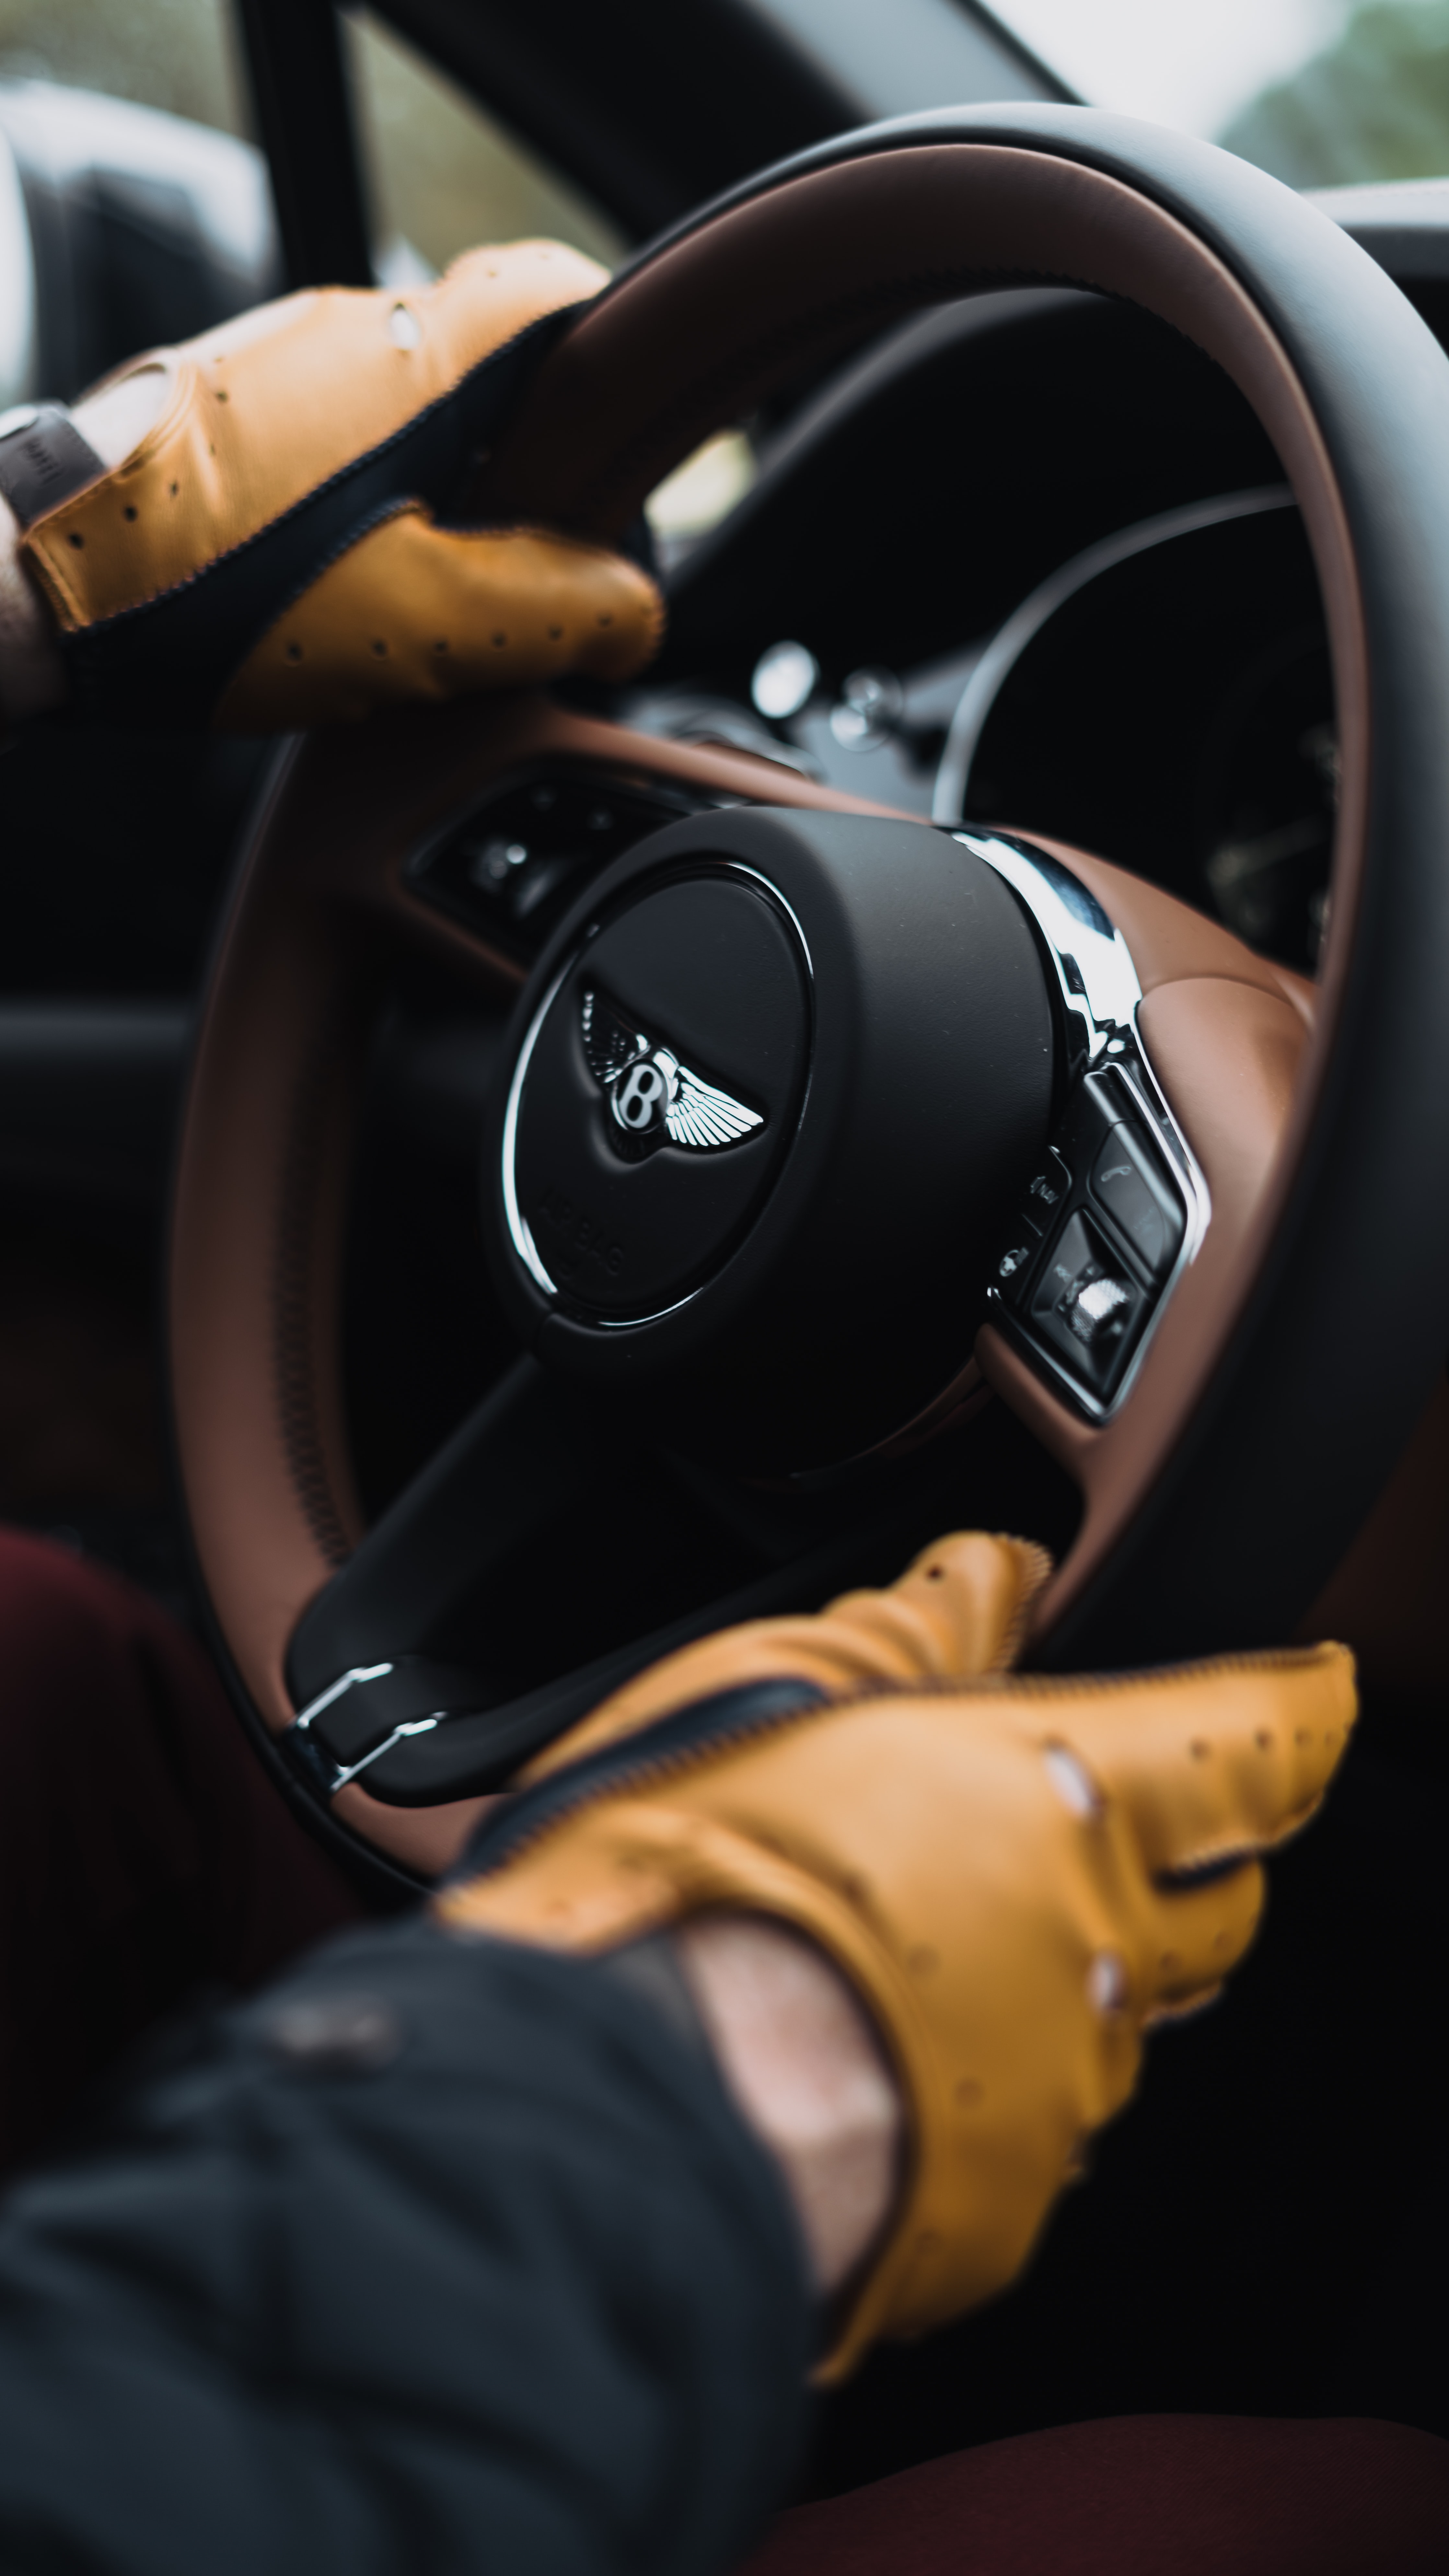 125840 Screensavers and Wallpapers Bentley for phone. Download bentley, cars, car, hands, steering wheel, rudder, gloves pictures for free